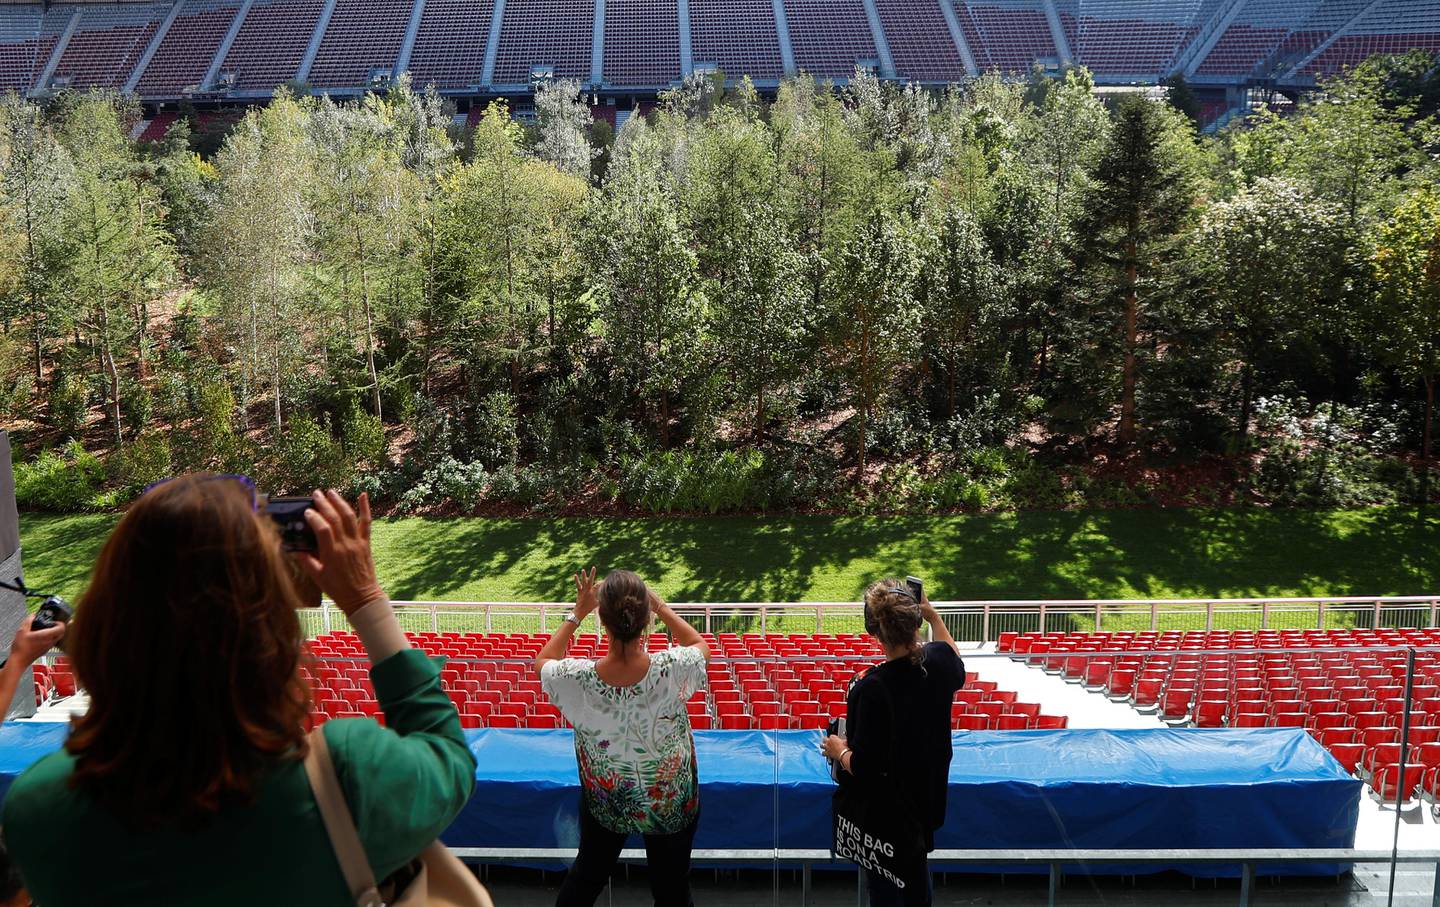 People take pictures of the temporary art intervention by Swiss artist Klaus Littmann "FOR FOREST – The Unending Attraction of Nature" on the Woerthersee Stadium in Klagenfurt, Austria September 5, 2019.   REUTERS/Leonhard Foeger